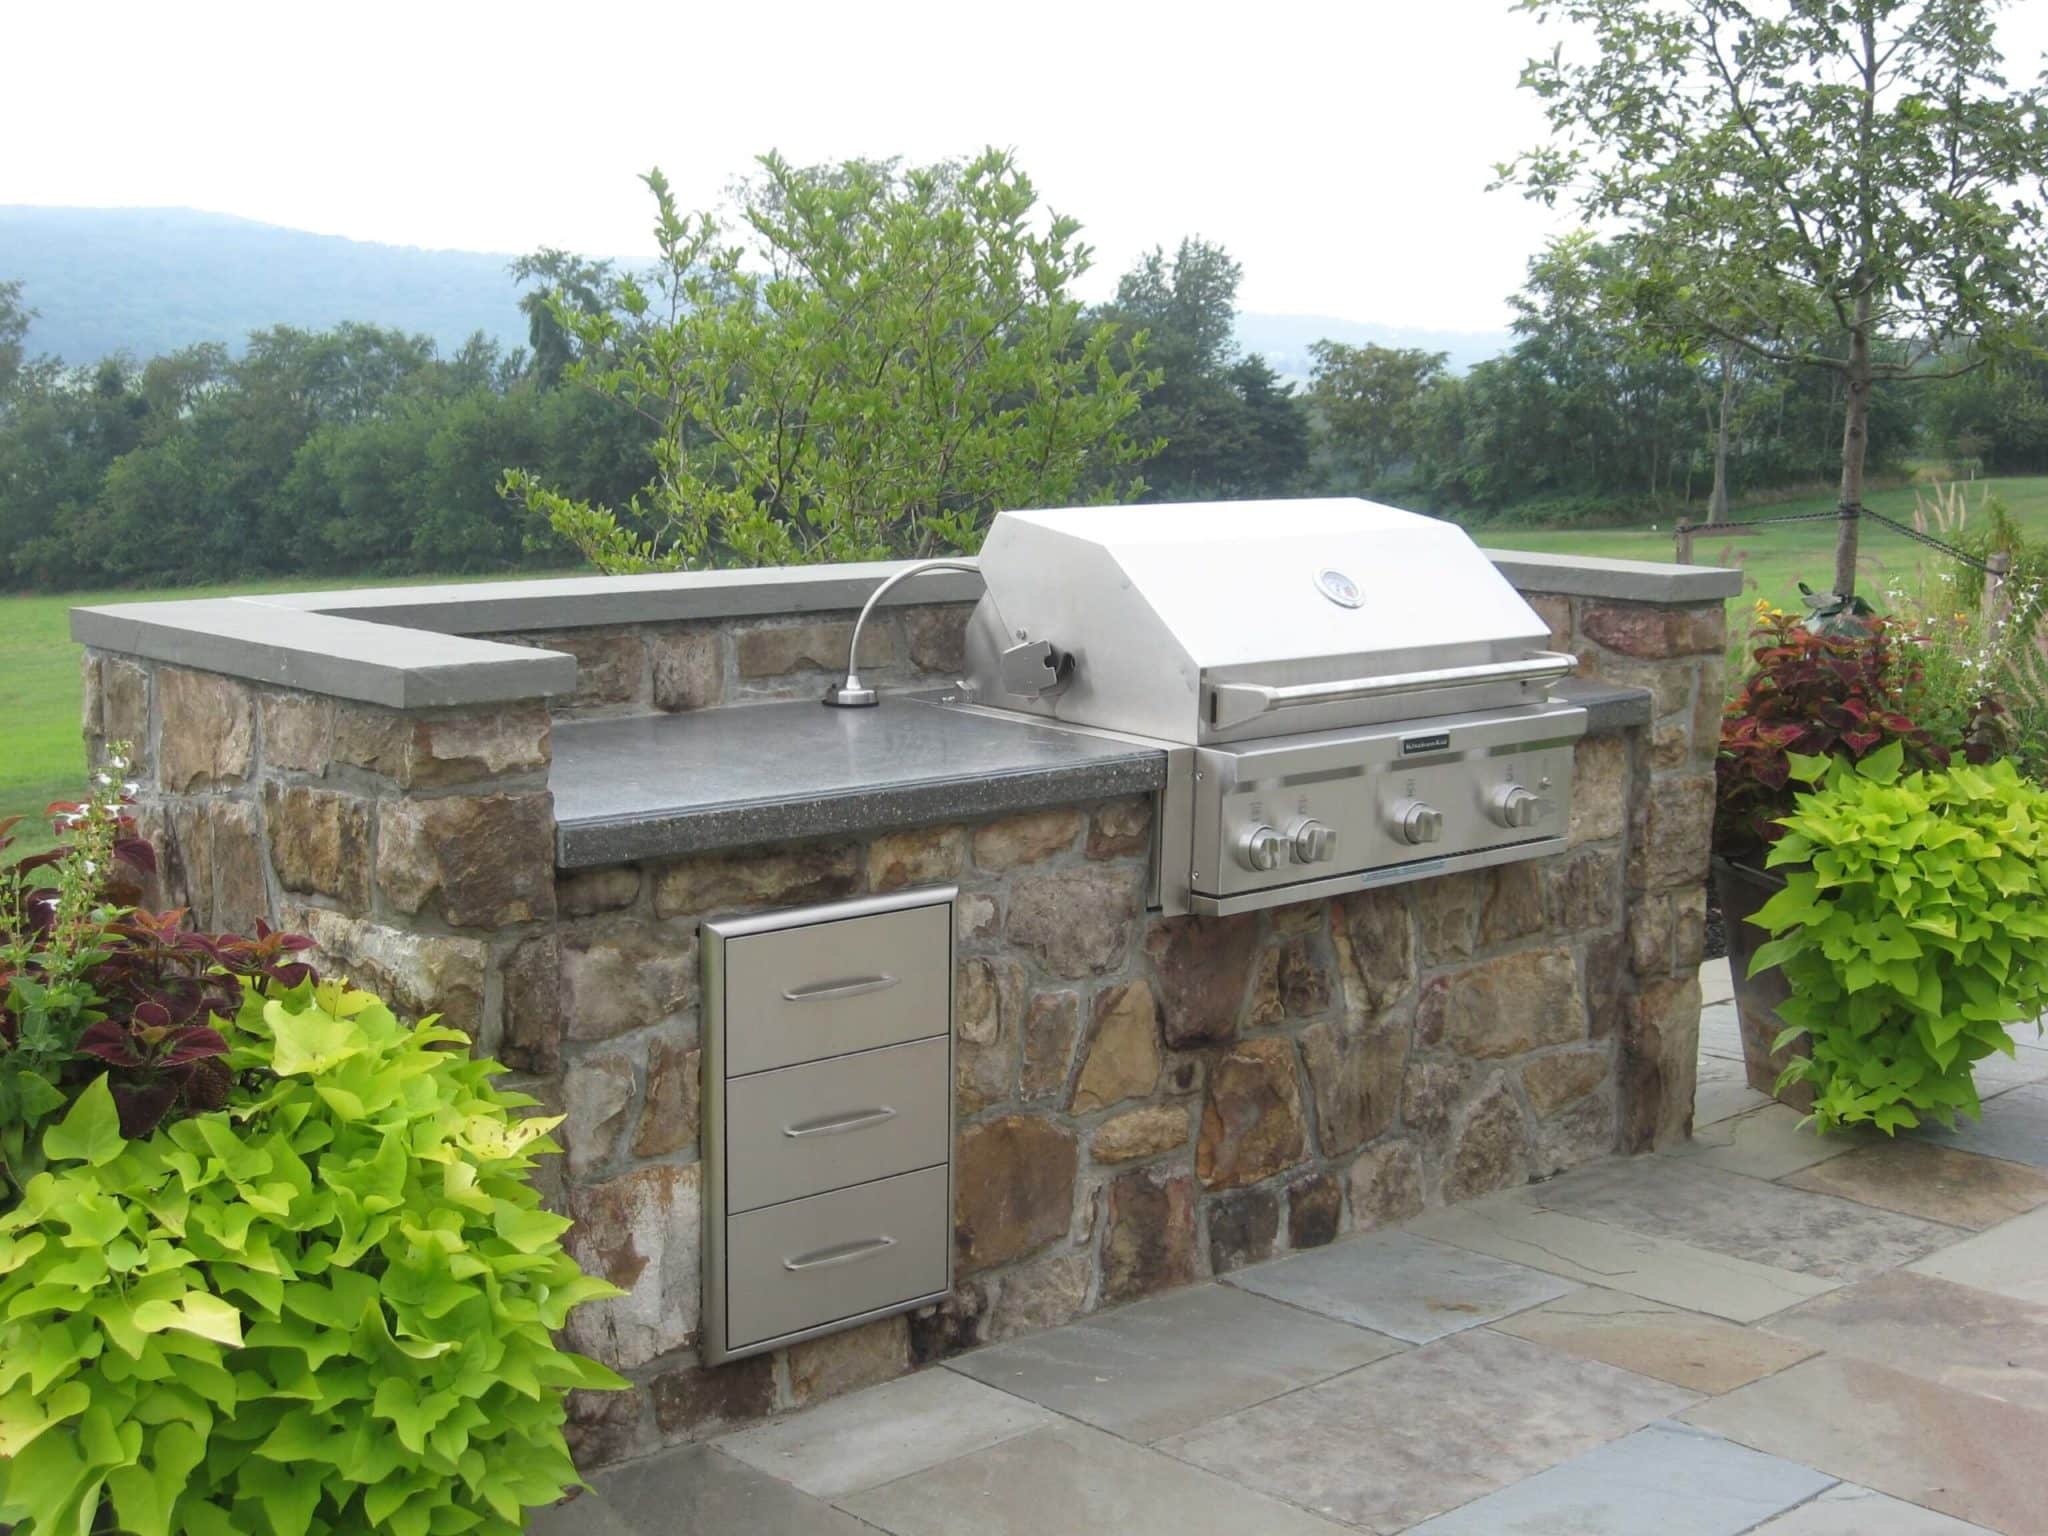 303 Custom Built Gas Grill and Concrete Countertop